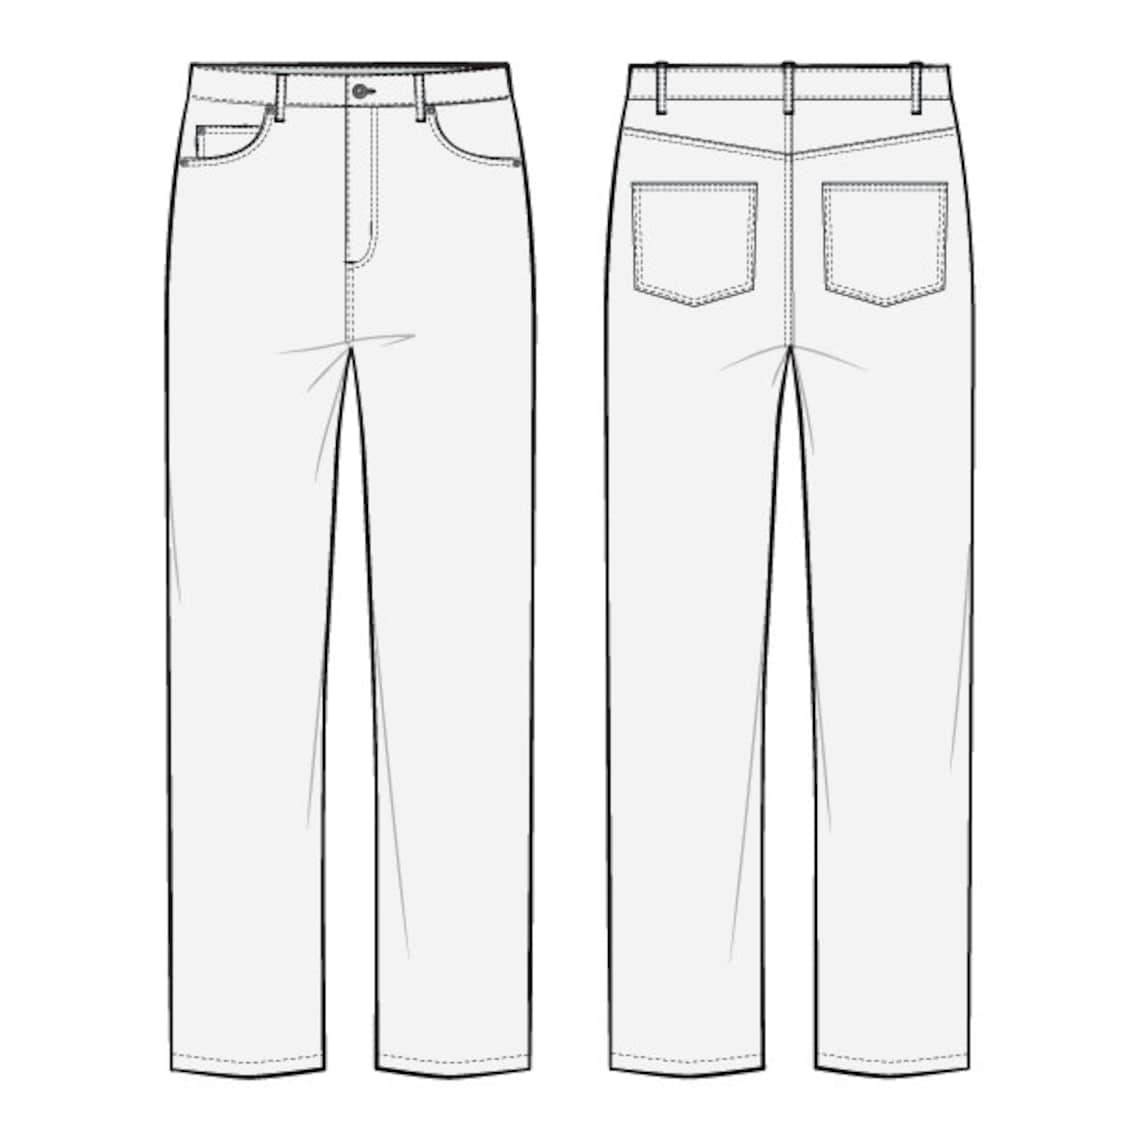 Baggy 5 Pocket Jeans PDF Sewing Pattern Sizes 28 / 29 / 30 / - Etsy